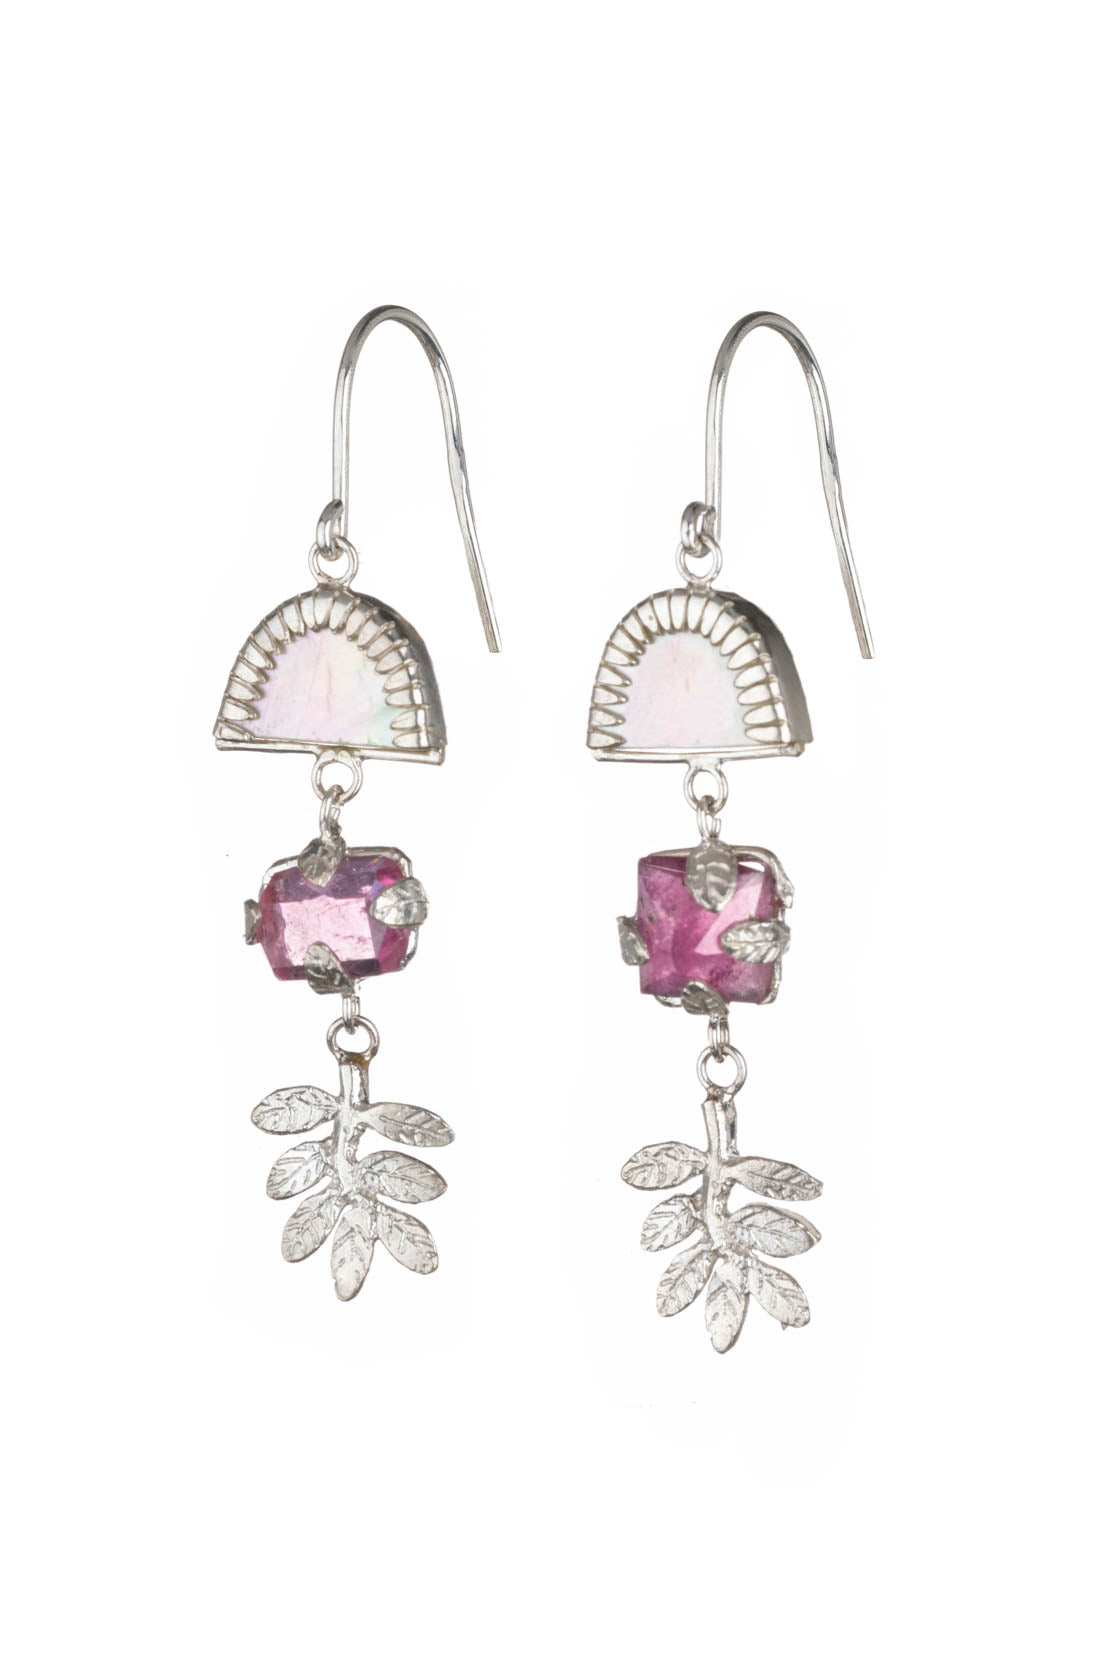 Botanical Drop Earrings - pink tourmaline and mother of pearl